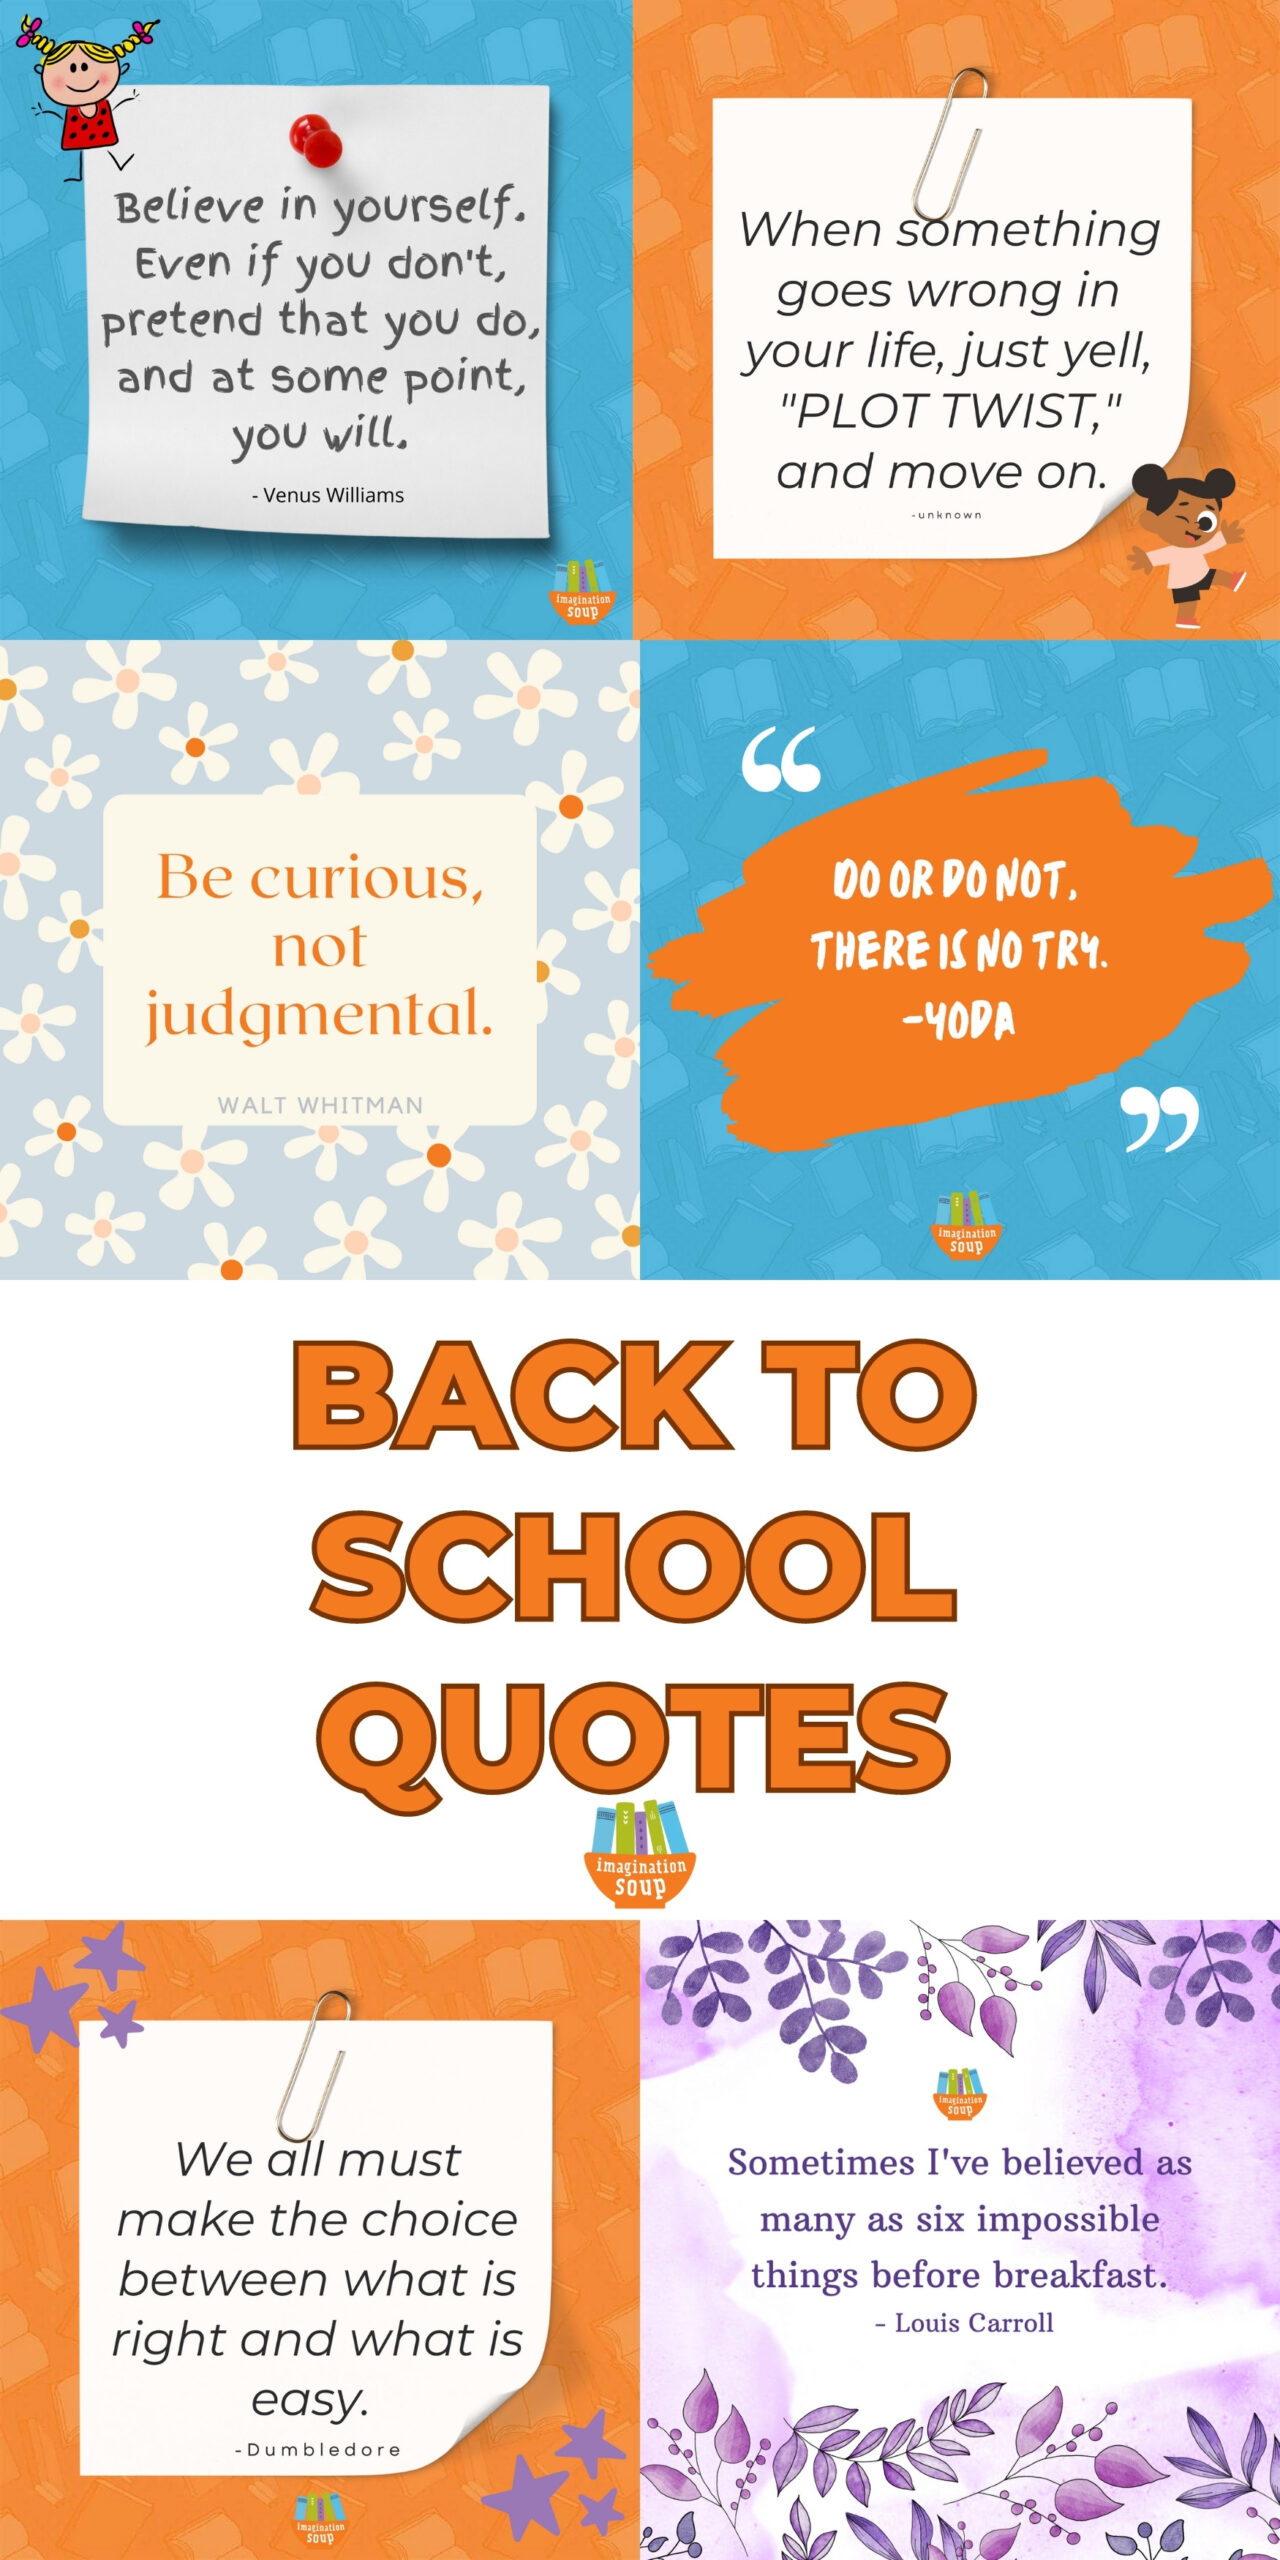 20 inspirational back to school quotes